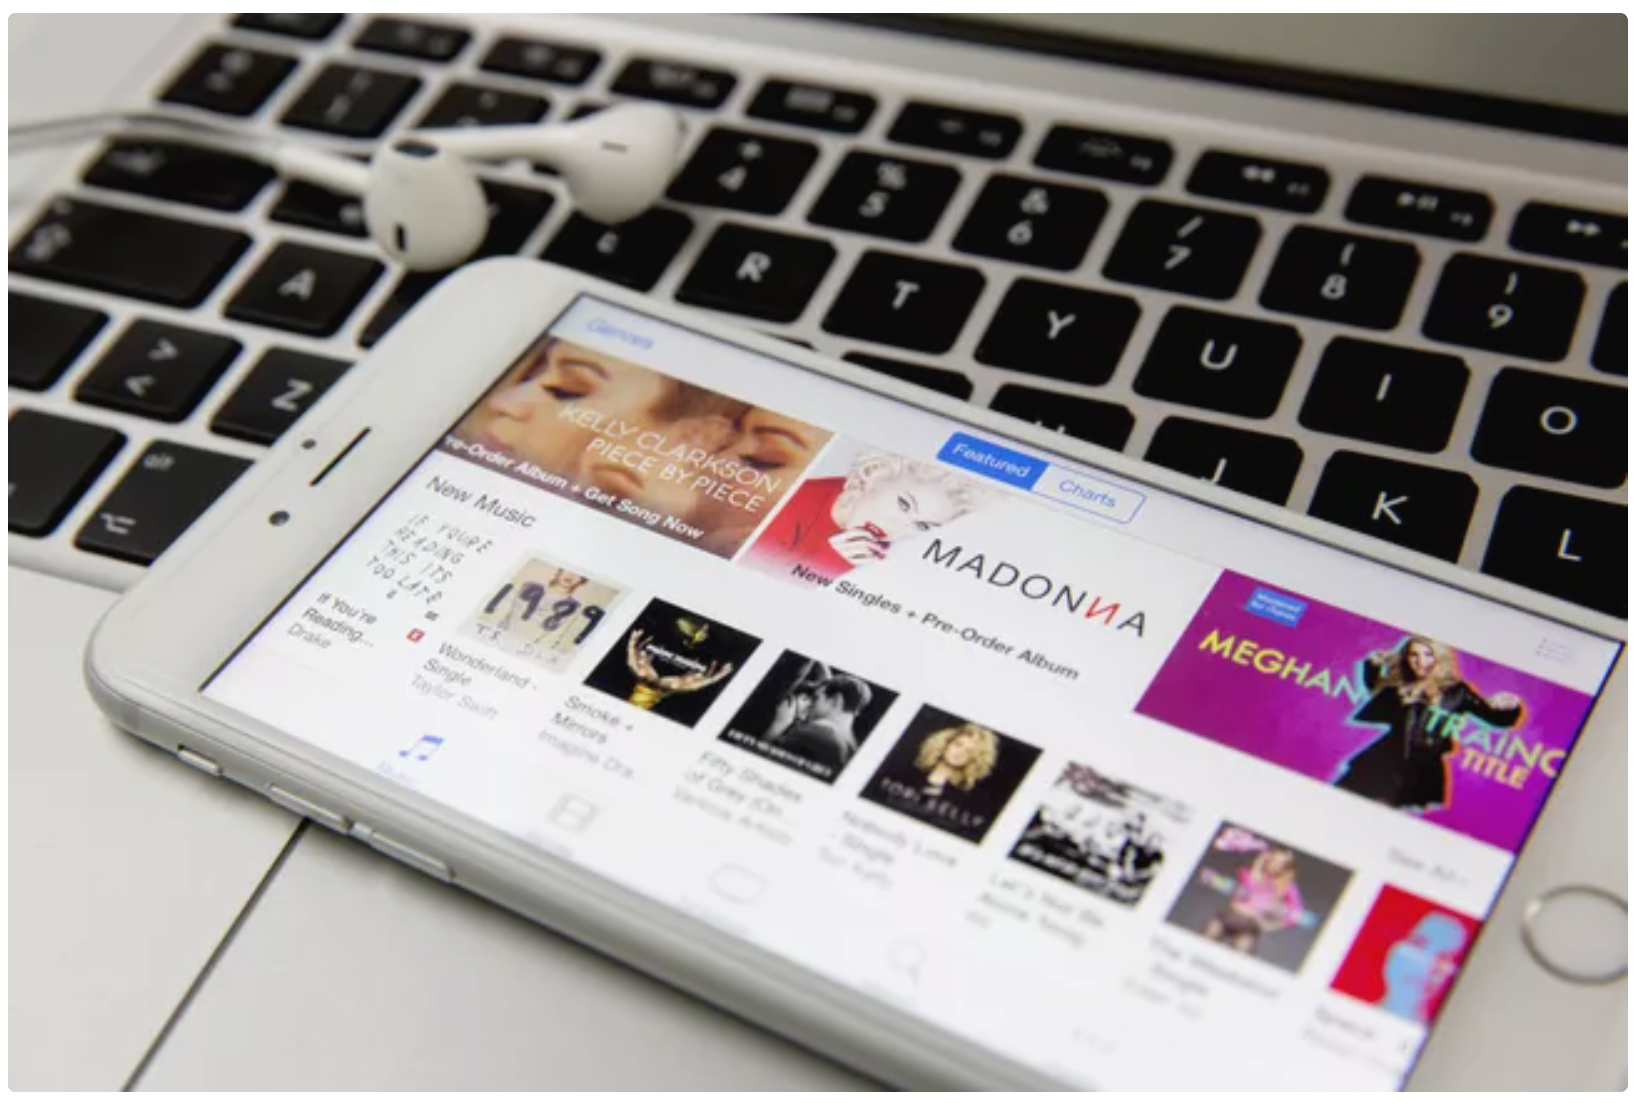 HOW TO GET FREE ITUNES MUSIC OF DIFFERENT SINGERS, BANDS